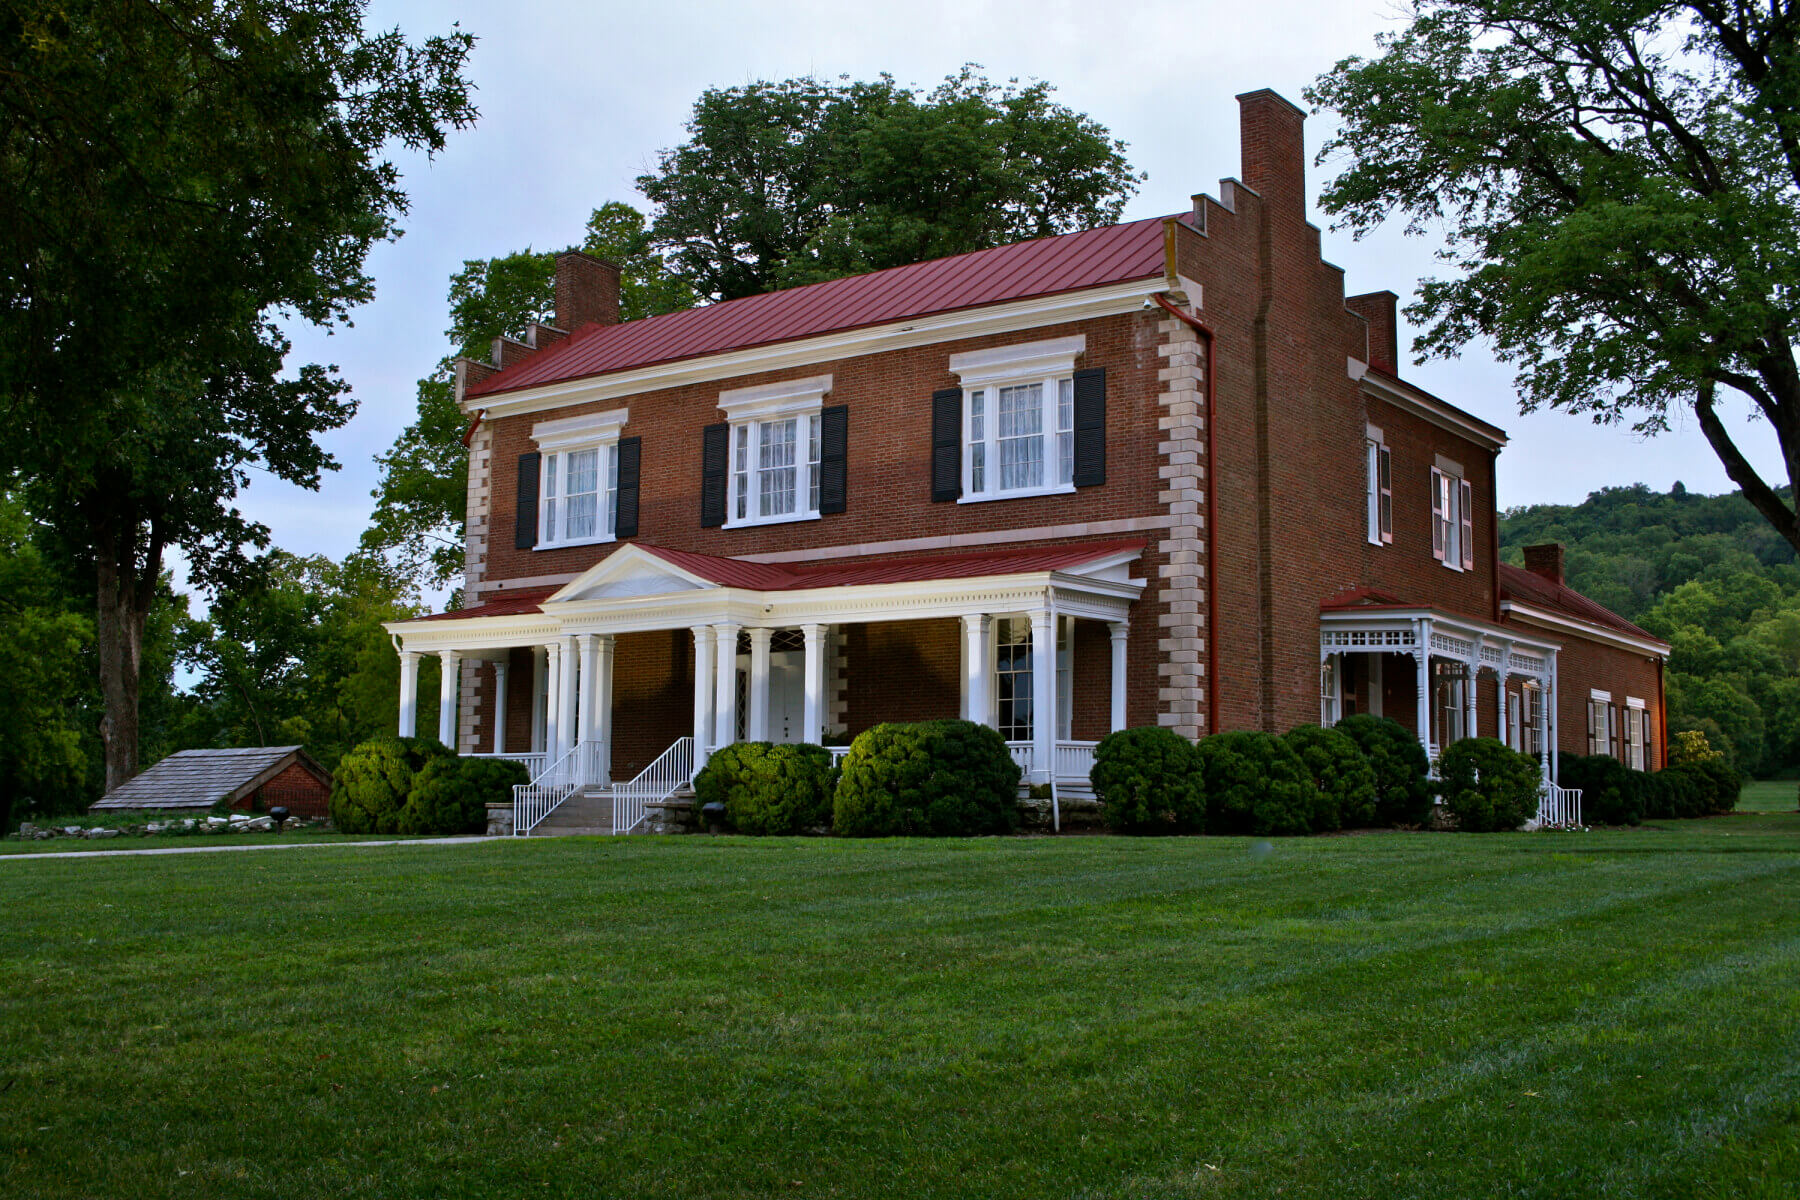 A historic home with grass and trees in the background at Marcella Vivrette Smith Park